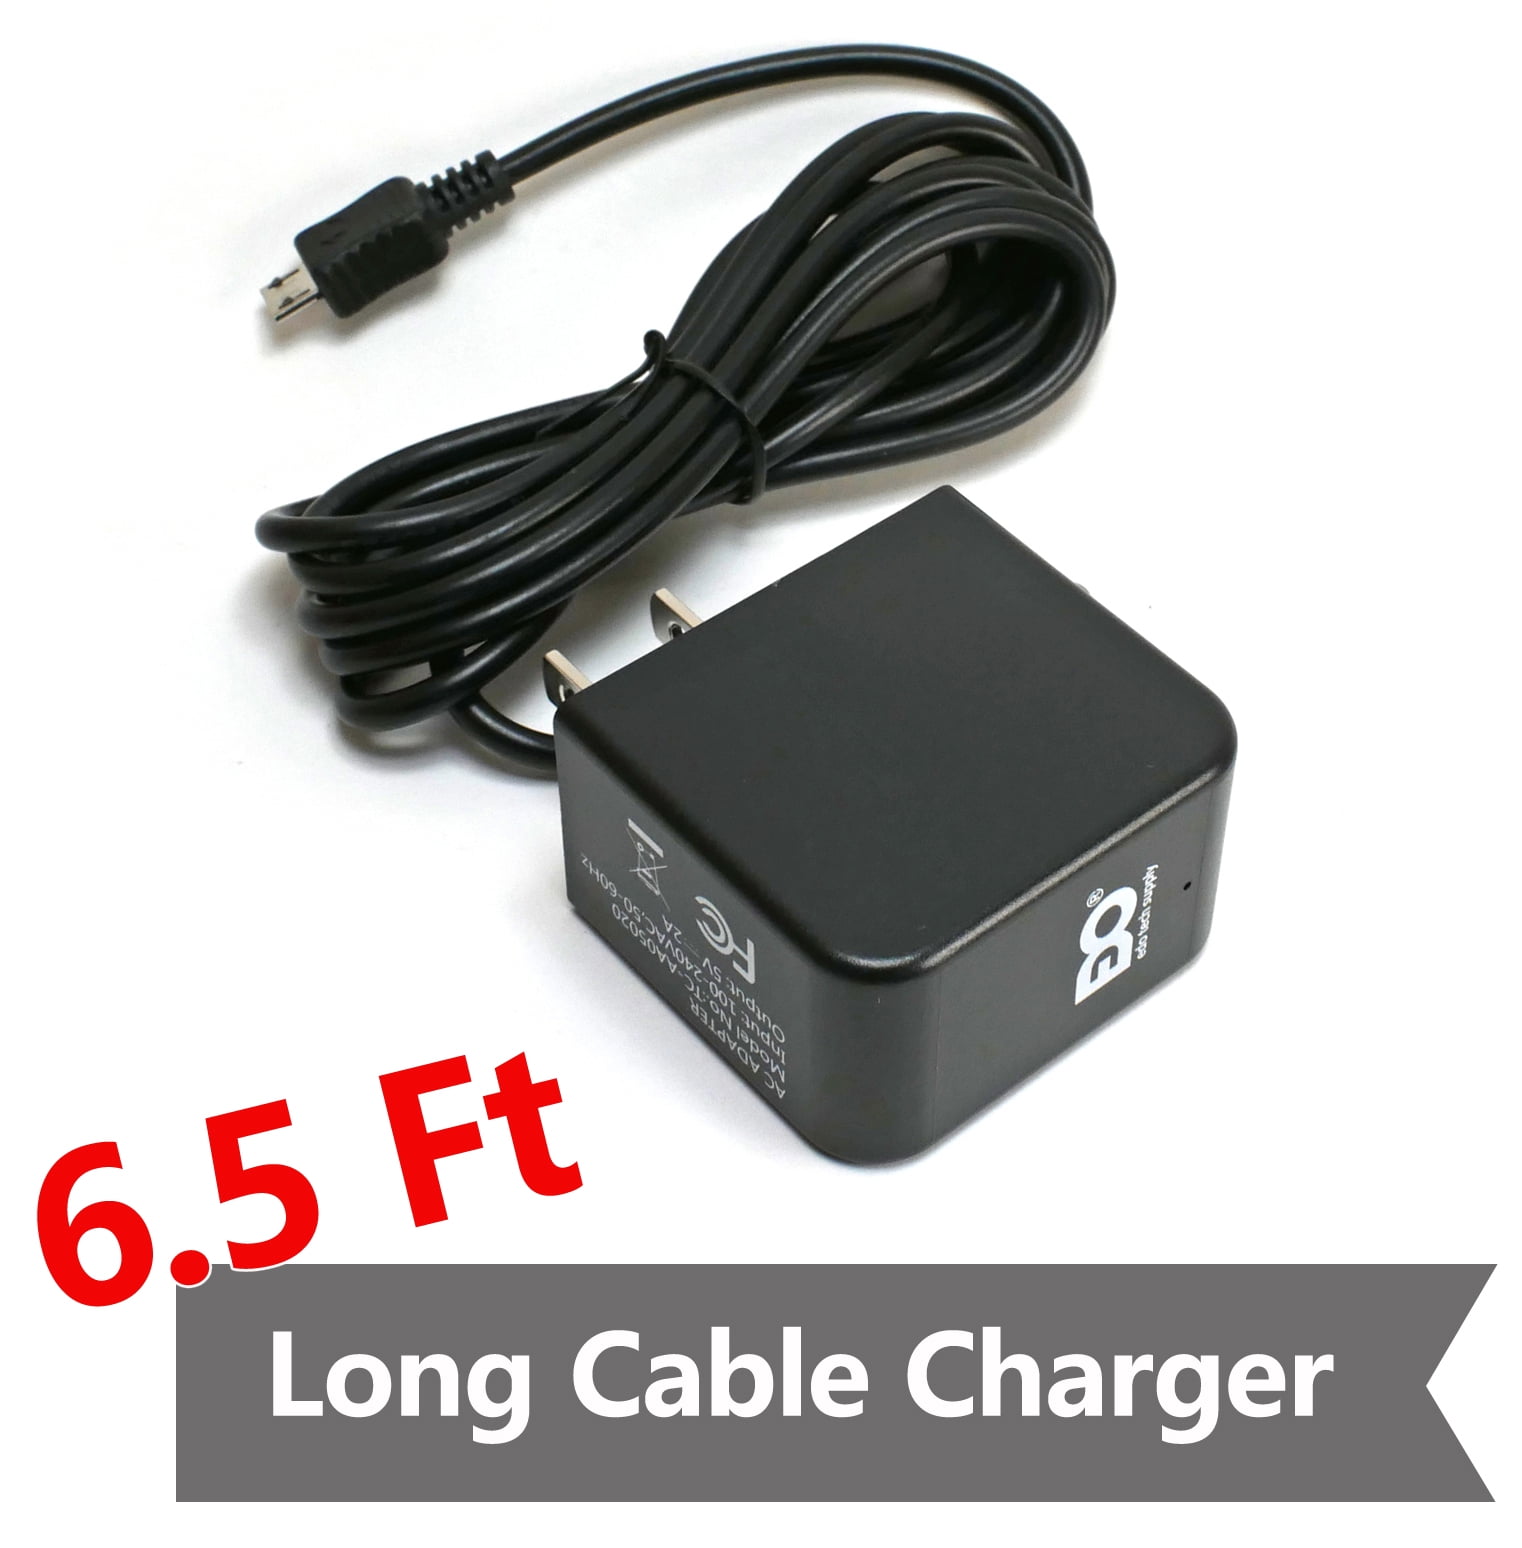 6.5 Ft Wall Charger for Amazon Kindle Fire HD HDX 7 8.9 4G Power Supply Cord AC 